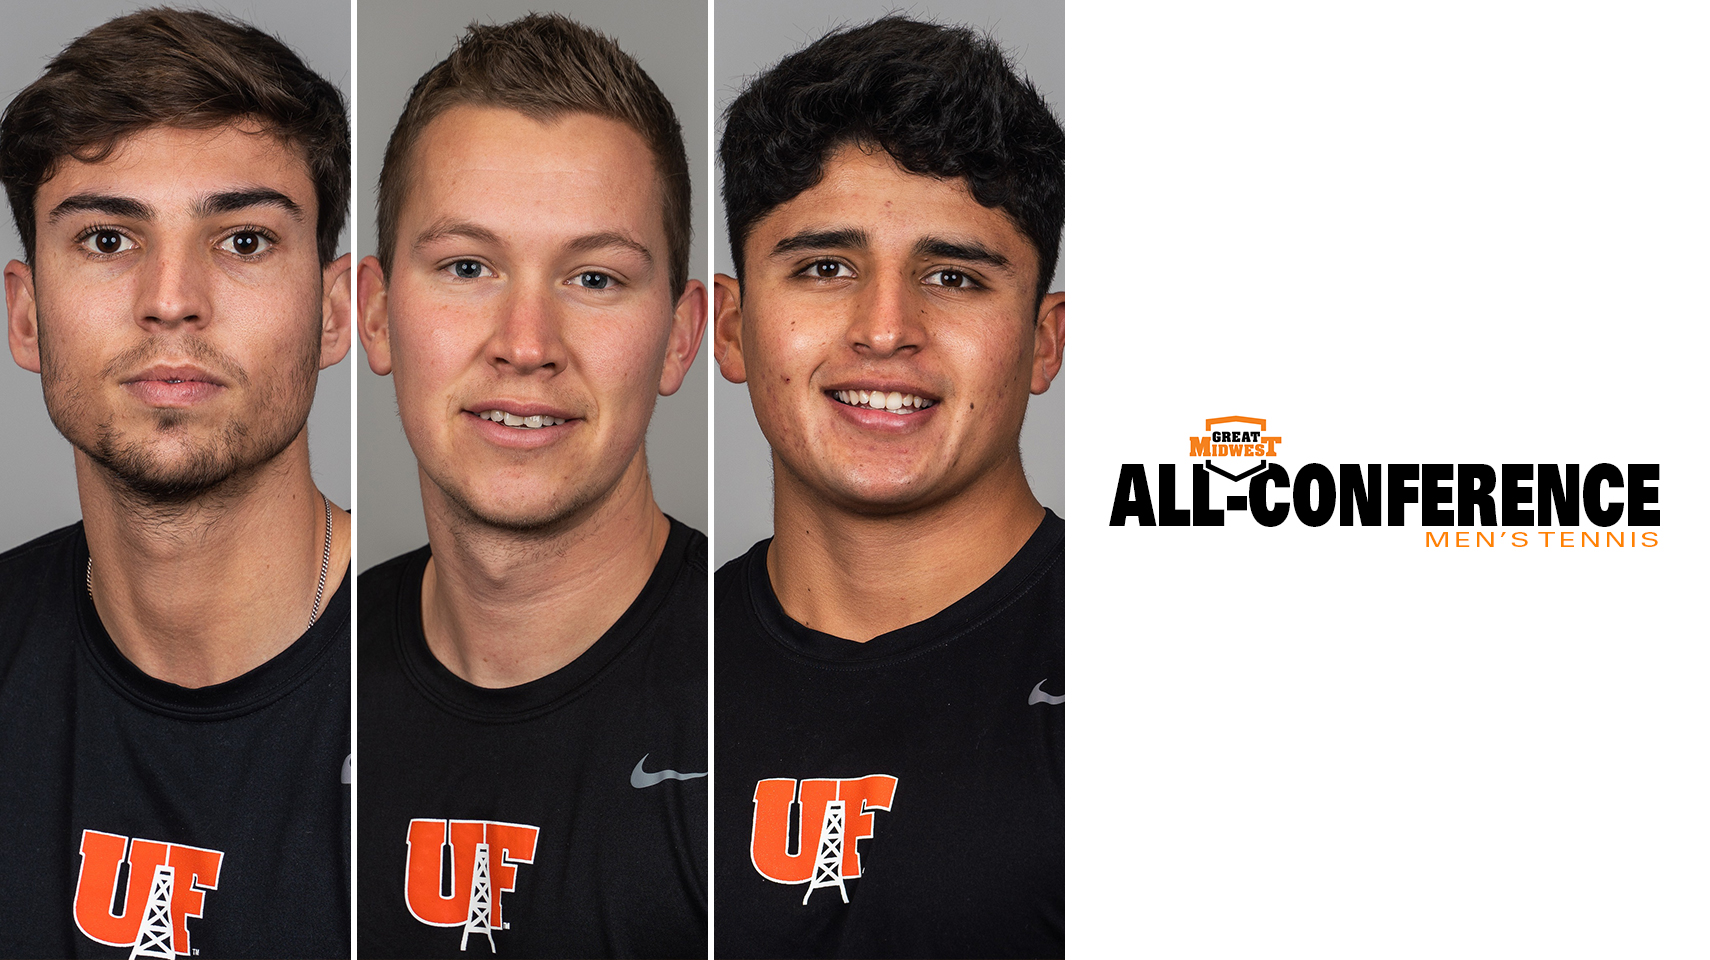 Men's Tennis All-Conference